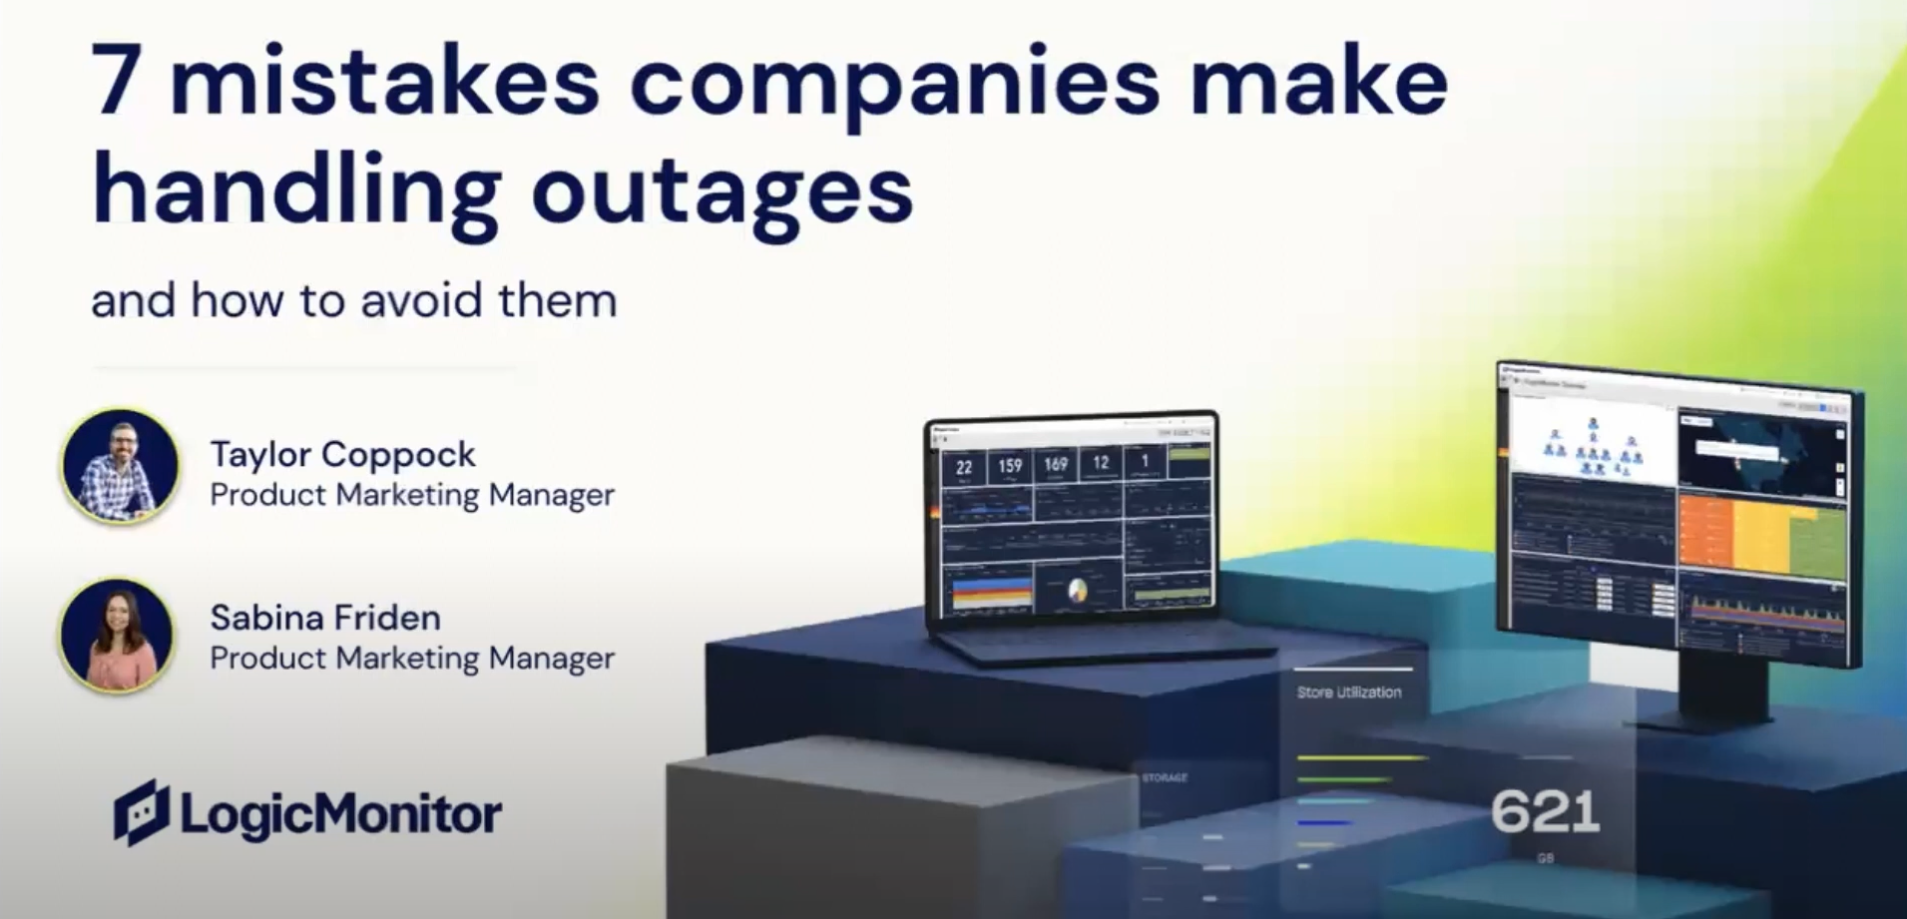 7 mistakes companies make handling outages